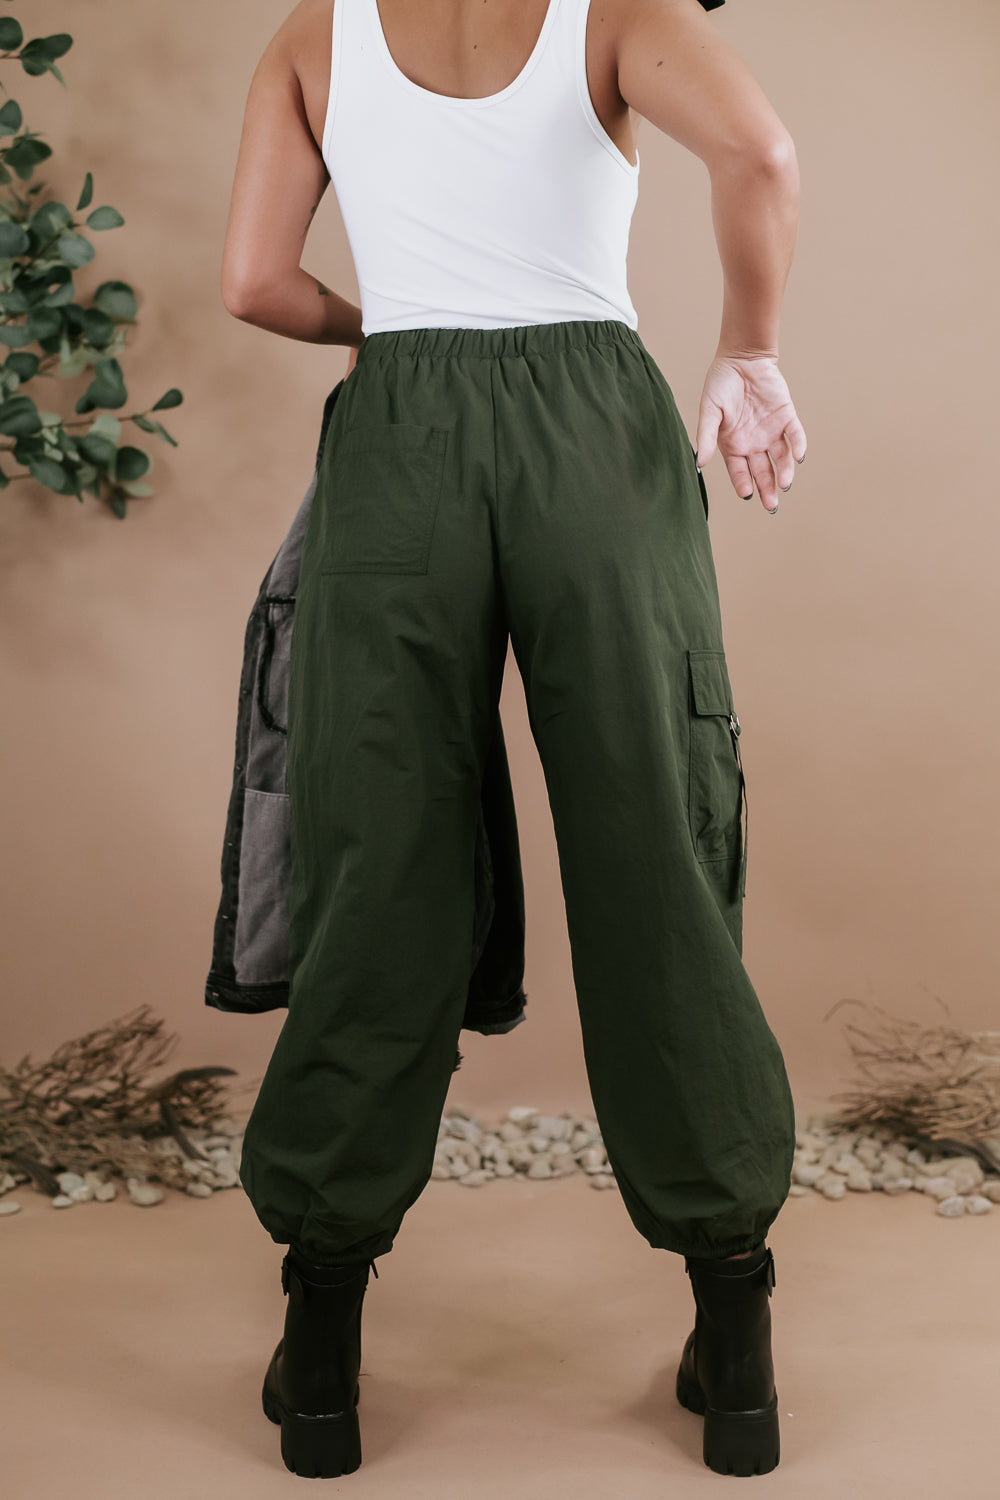 Get Going Cargo Pants, Olive